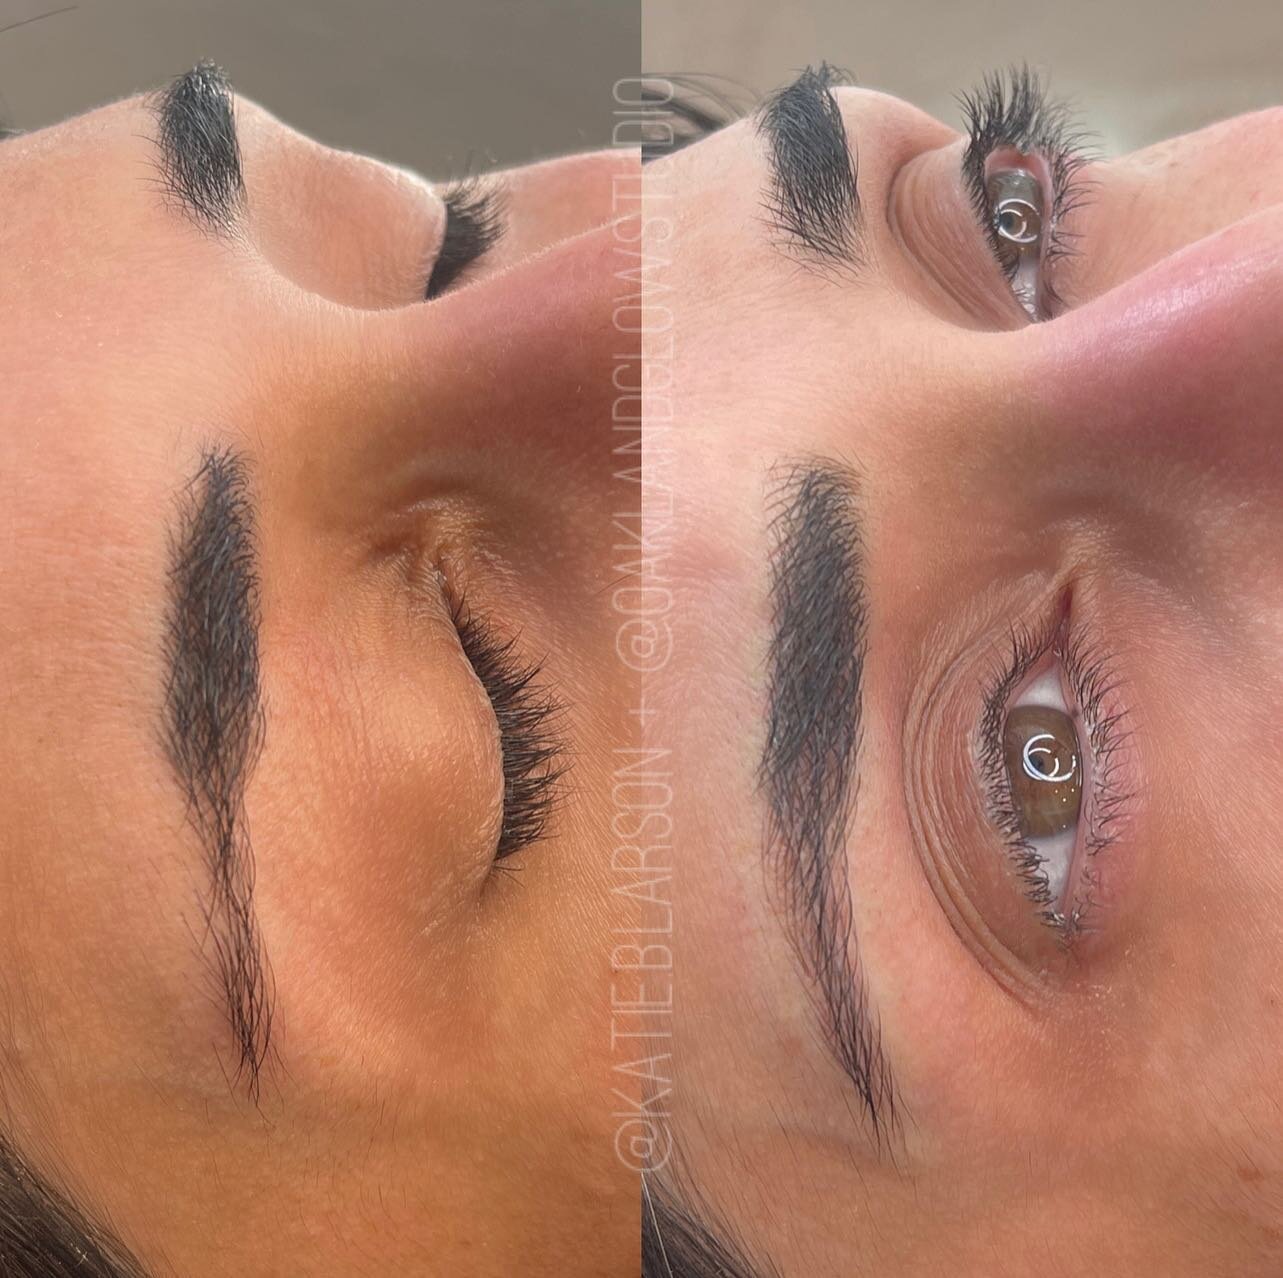 SHAPE UPDATE
Revive your shape in a snap🫰🏼✨
I opened a few more spots this month, snag yourself a session and come hang with me! 

Xx
 
#microblading #naturalbeauty #naturalmicroblading #bayareamicroblading #oaklandmicroblading #igdaily #transforma